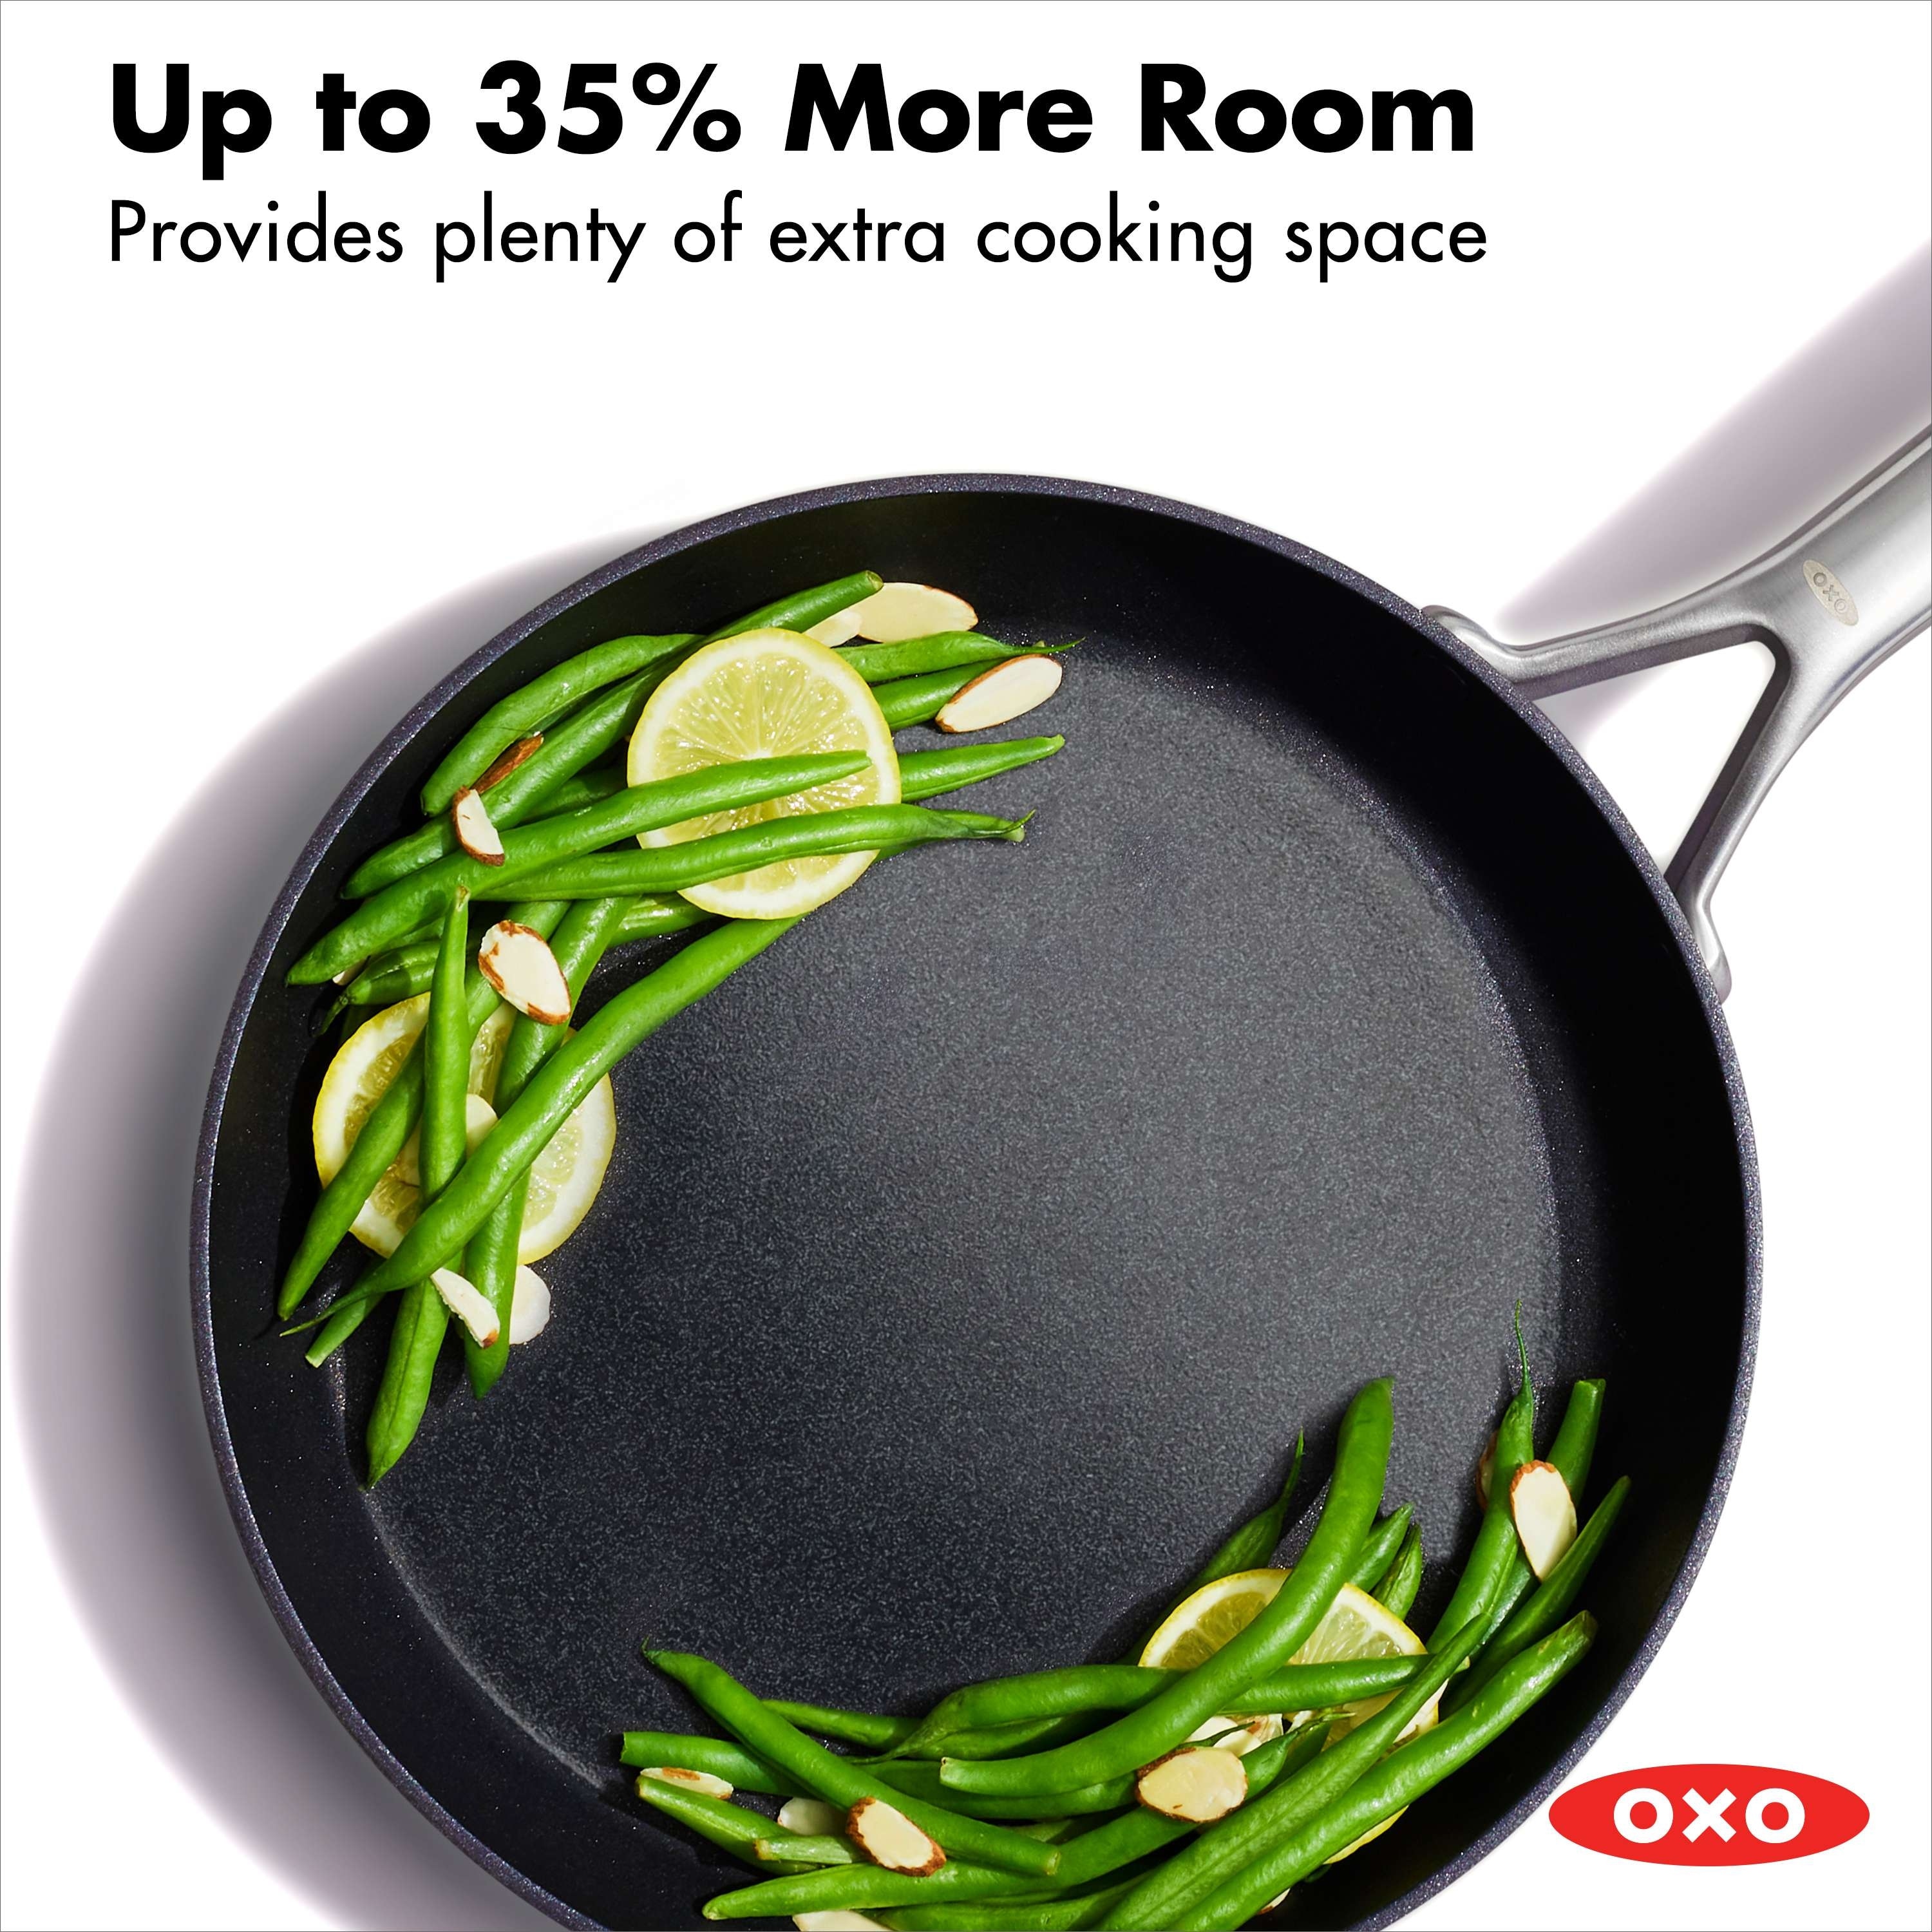 https://ak1.ostkcdn.com/images/products/is/images/direct/151f0b4685d34c1591faee53eabf42c0d4446f71/OXO-Professional-Ceramic-Non-Stick-5-Piece-Cookware-Pots-and-Pans-Set.jpg